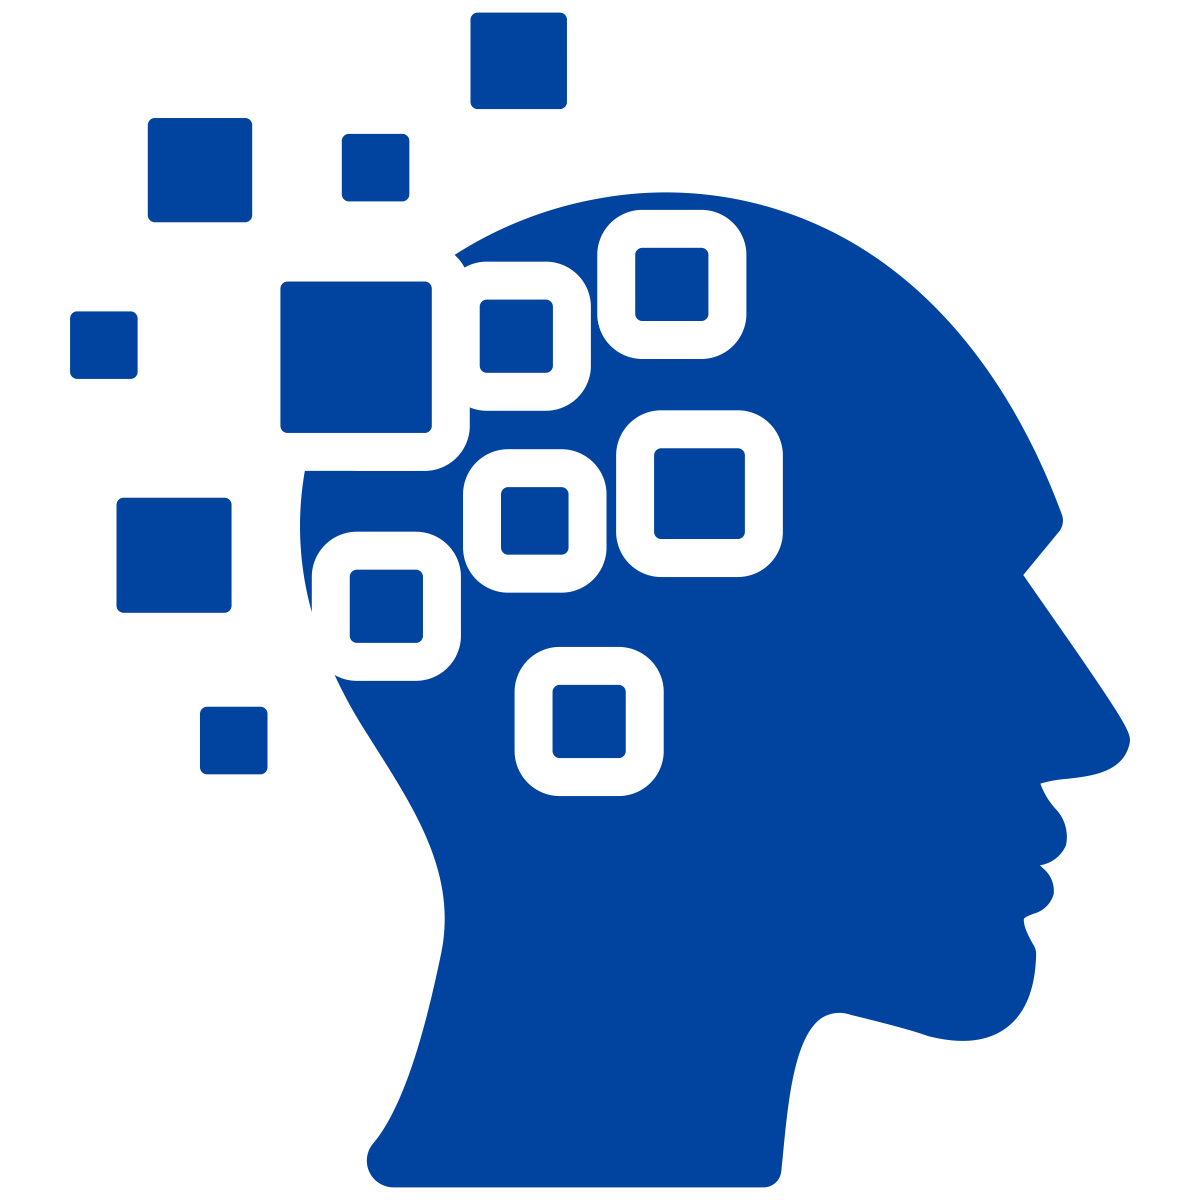 Blue human profile silhouette with digital data icons inside